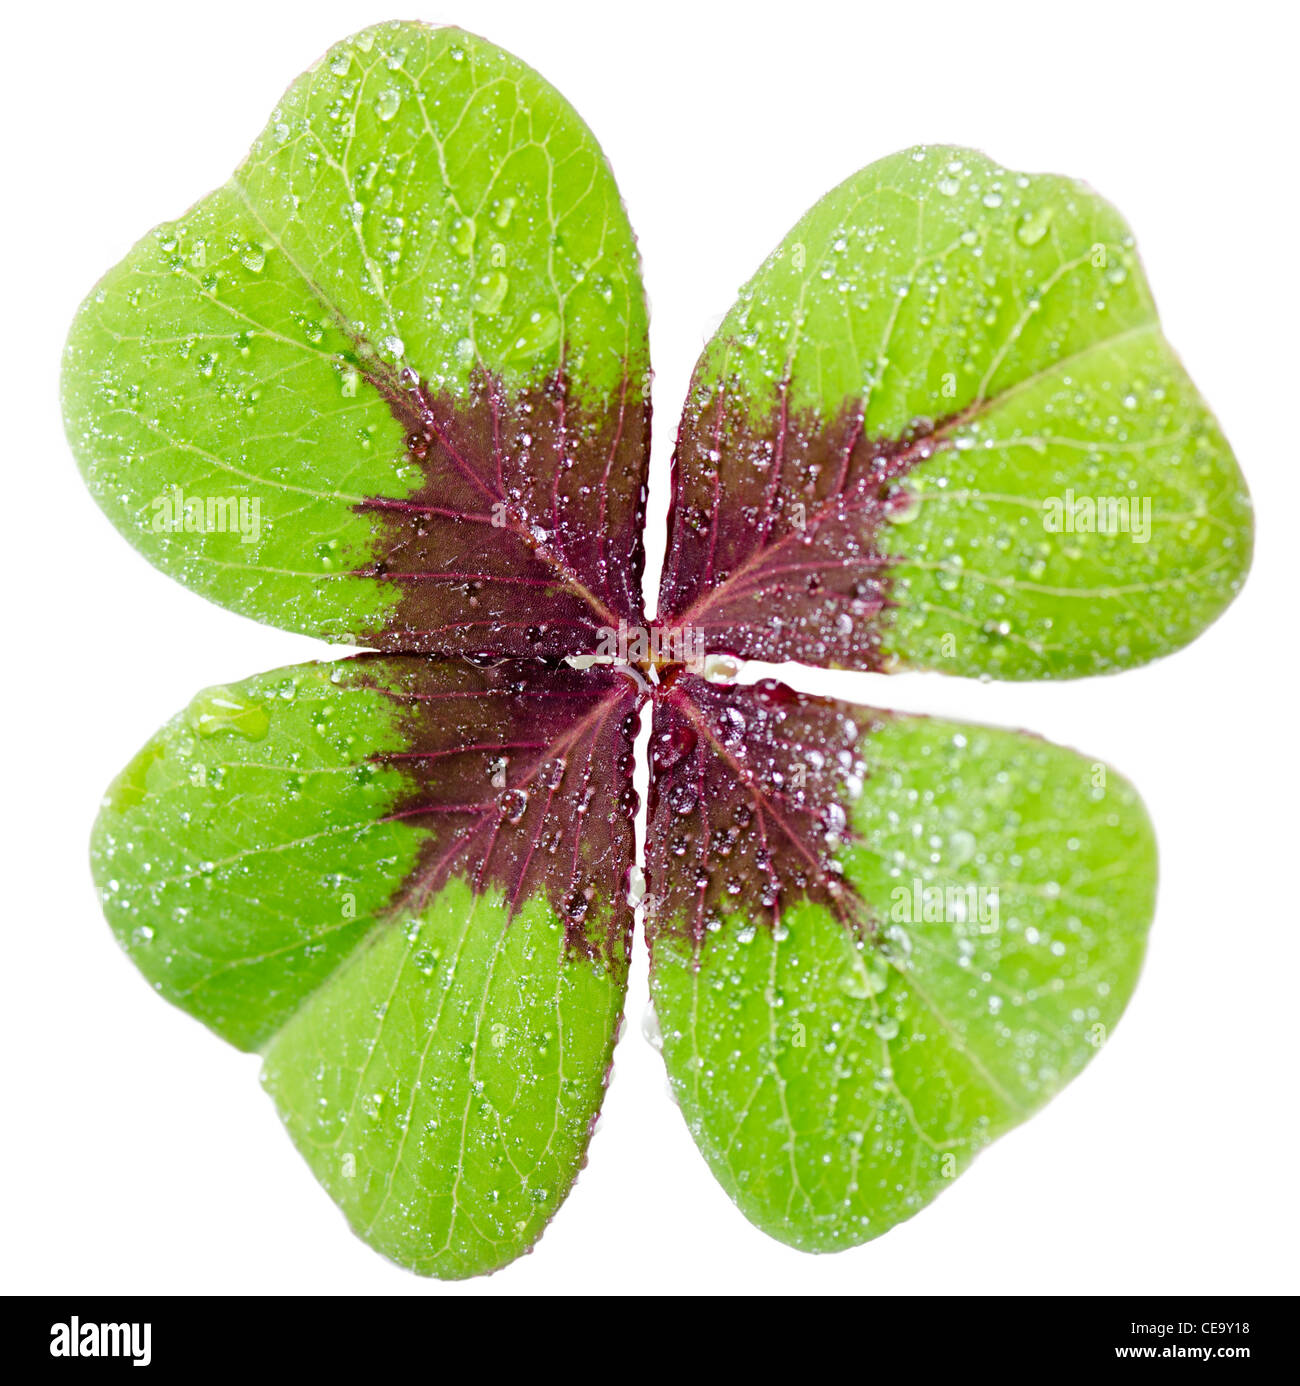 a four-leaved cloverleaf isolates before white background Stock Photo